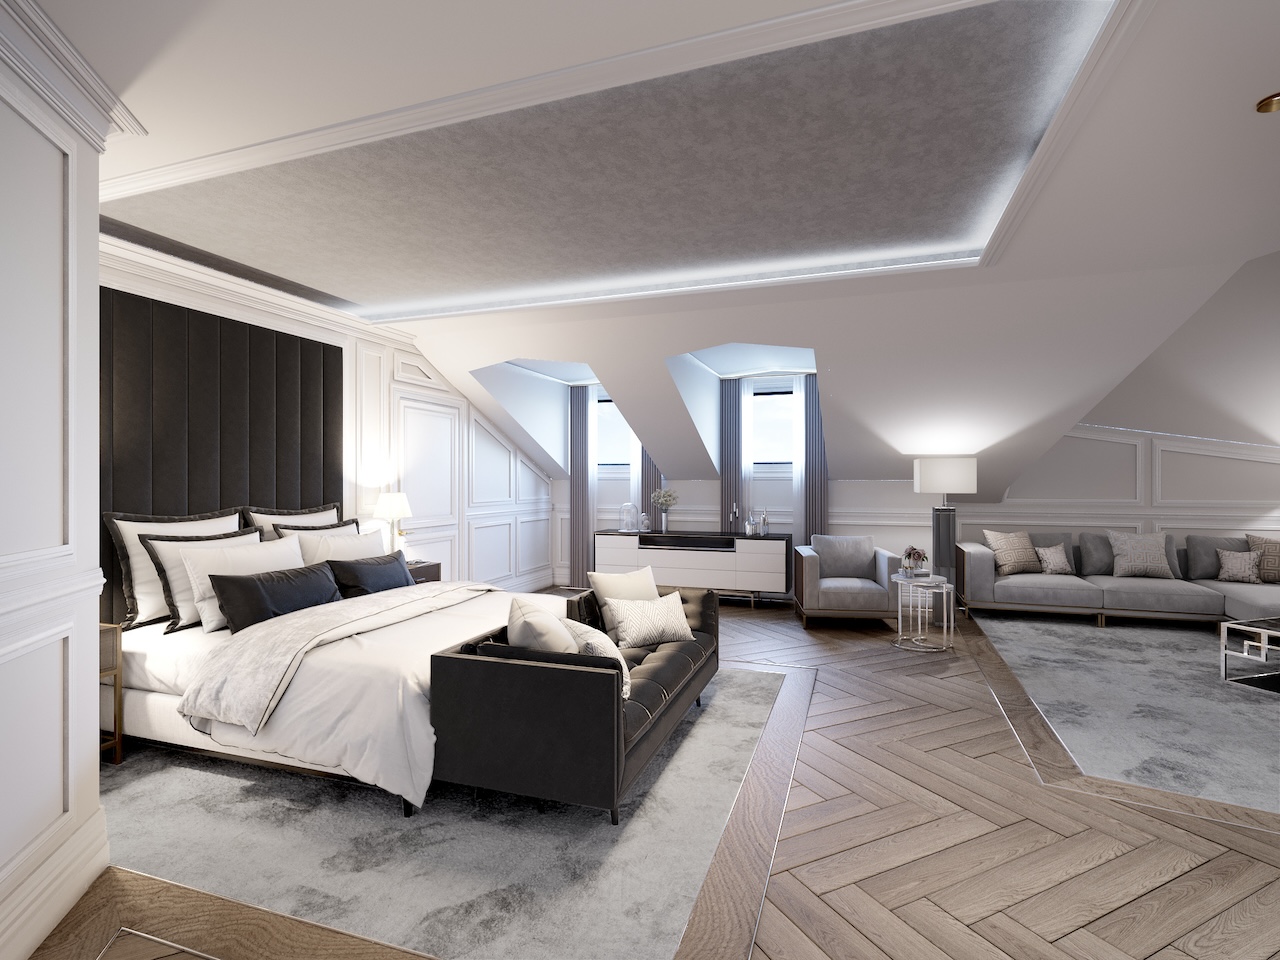 Ultima Collection has welcomed Ultima Geneva Quai Wilson, a sophisticated luxury retreat located in the heart of Geneva.